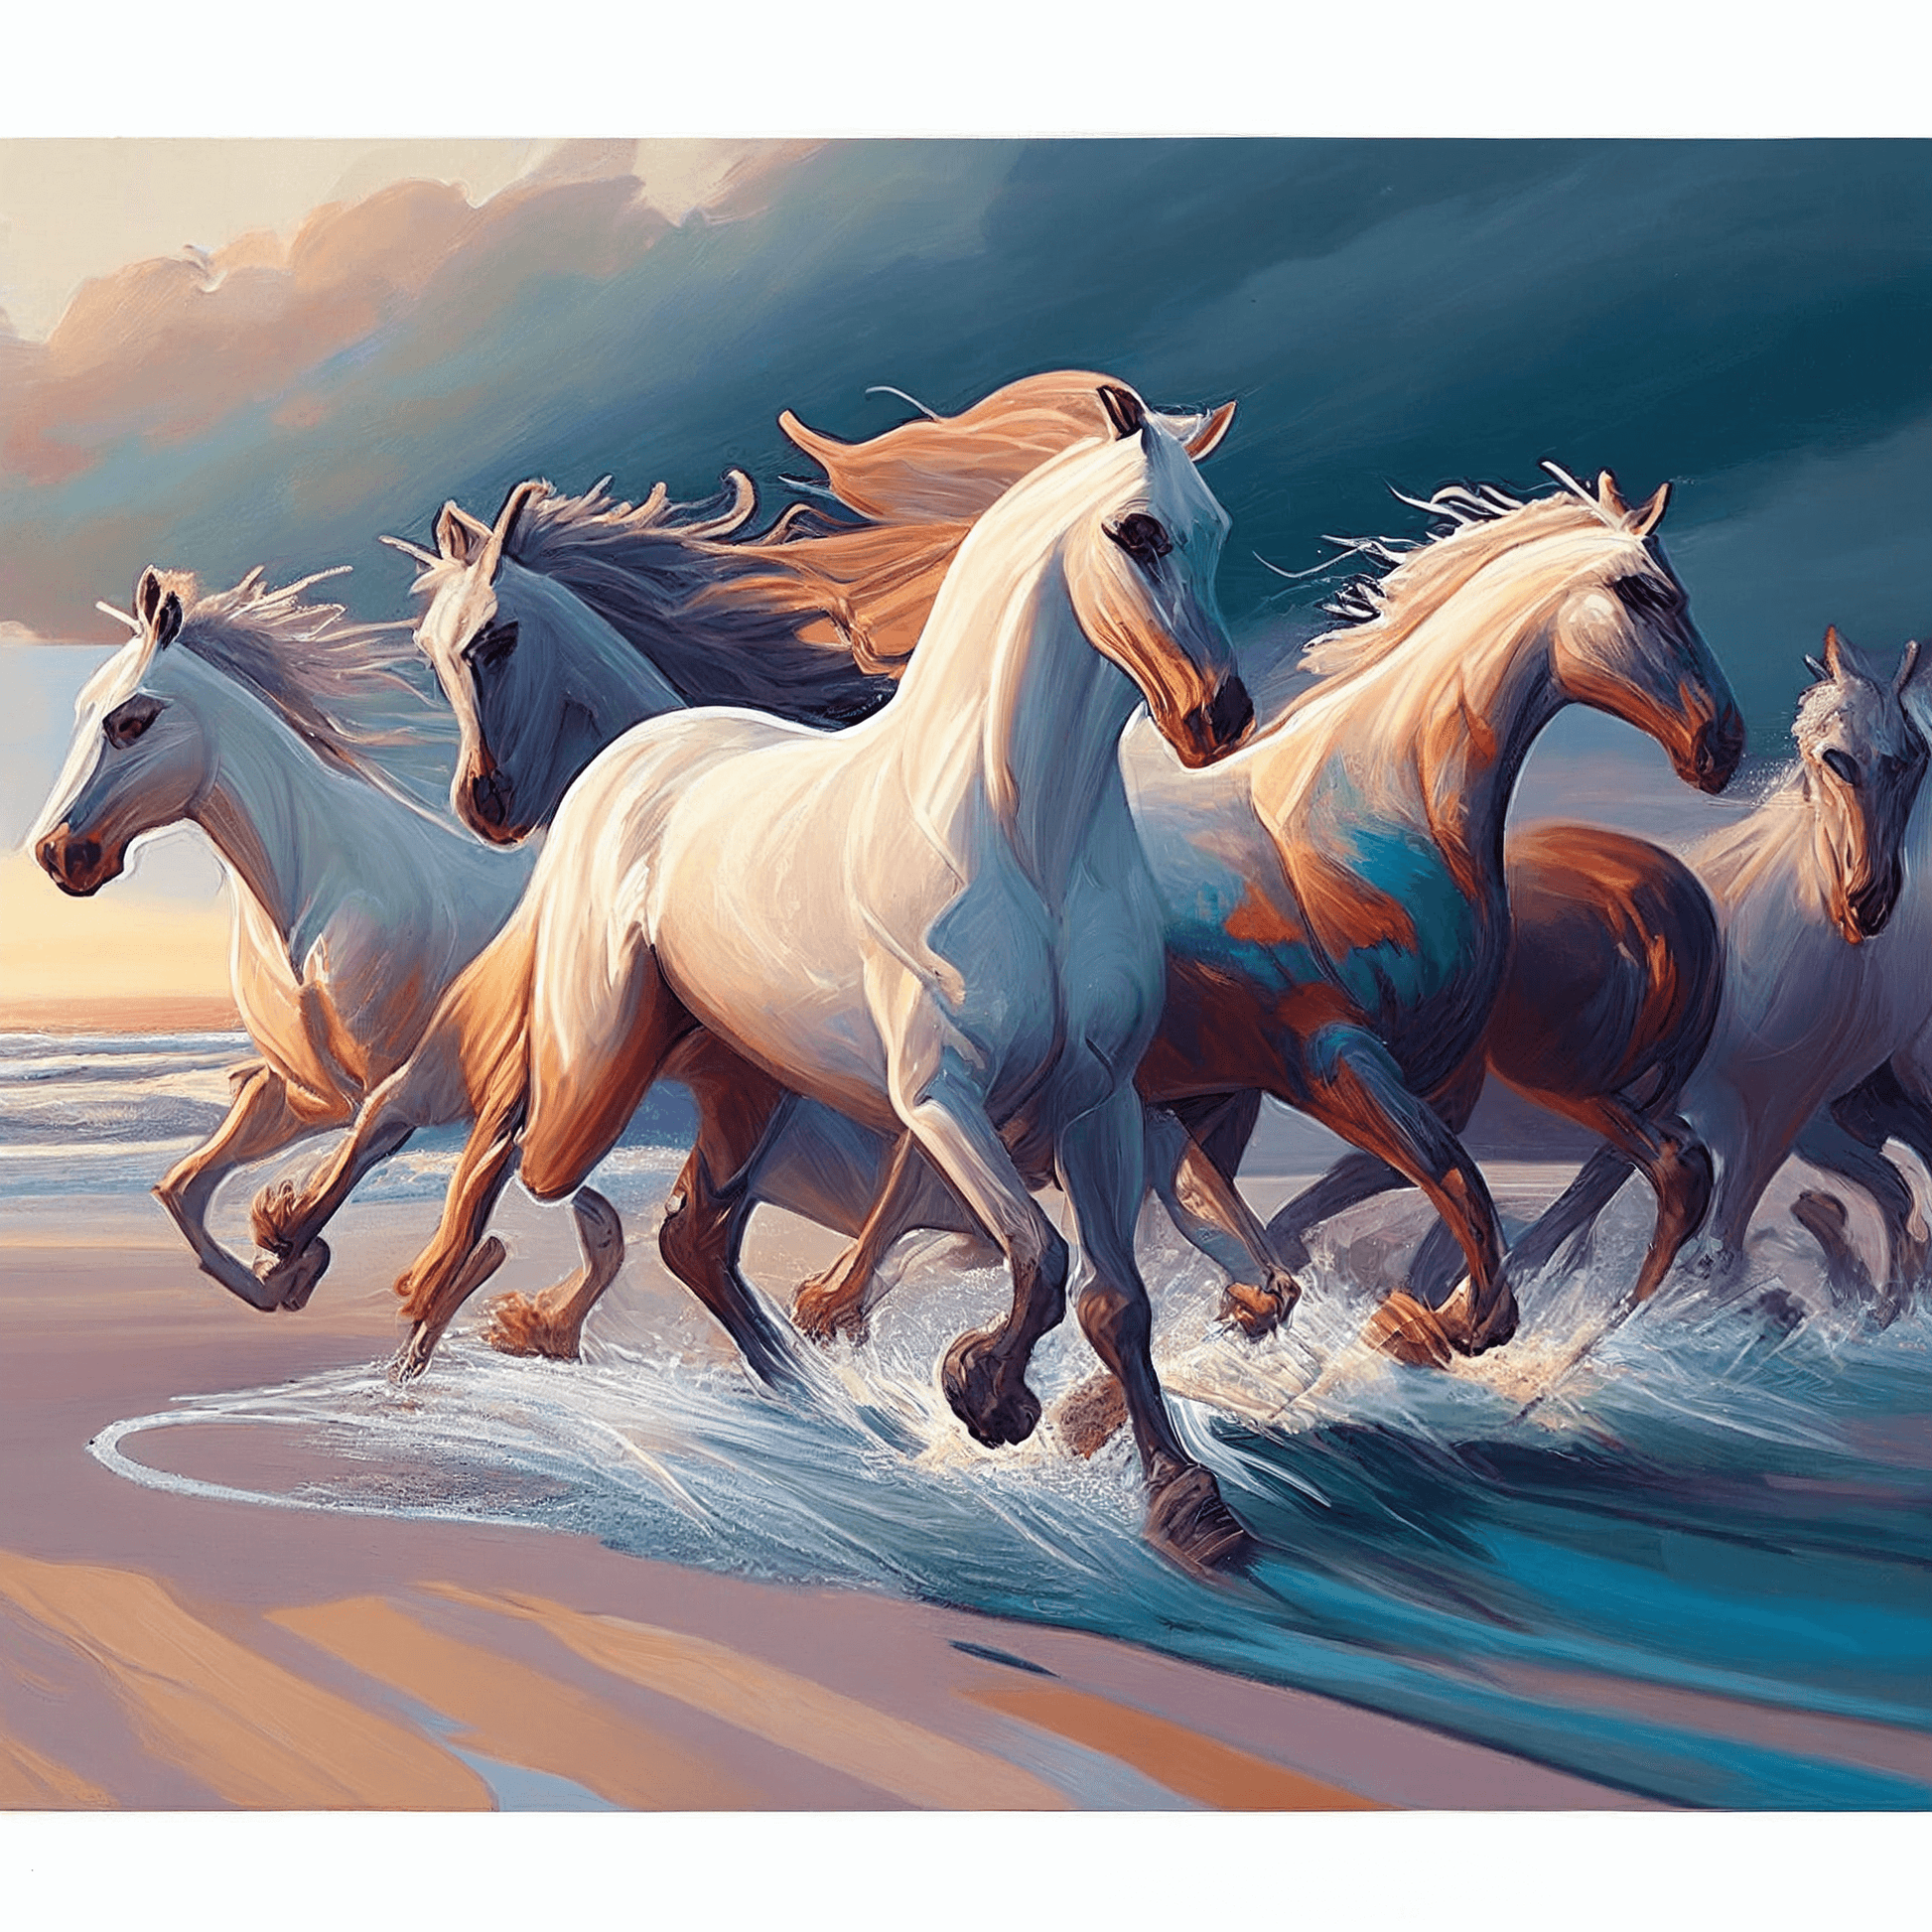 Description: Add a touch of beauty and energy to your home or office with this stunning digital painting of horses galloping on the beach. Download a high-quality digital copy and admire every detail of the image with extraordinary clarity. "Gallop on the Beach" is a perfect painting for those who love horses, nature, and modern art.